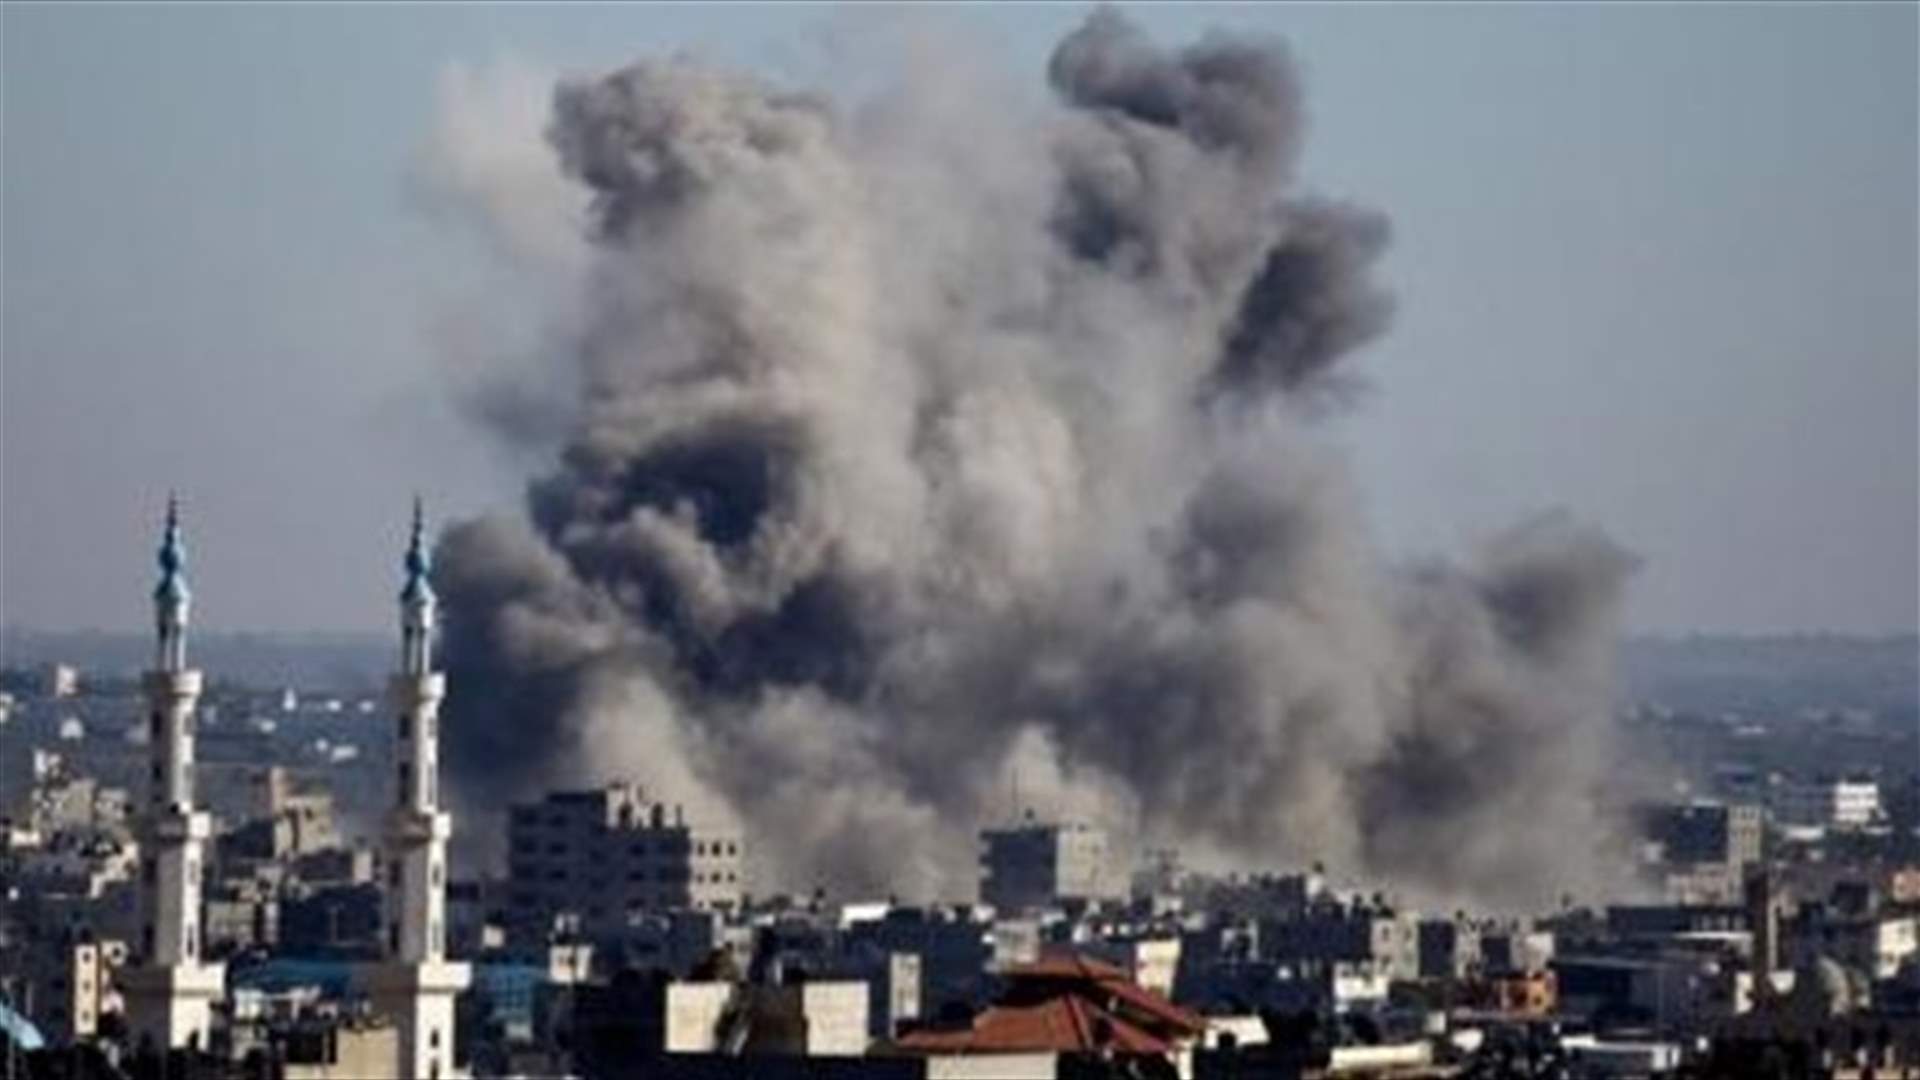 Rocket from Gaza draws Israeli air strikes, one person wounded